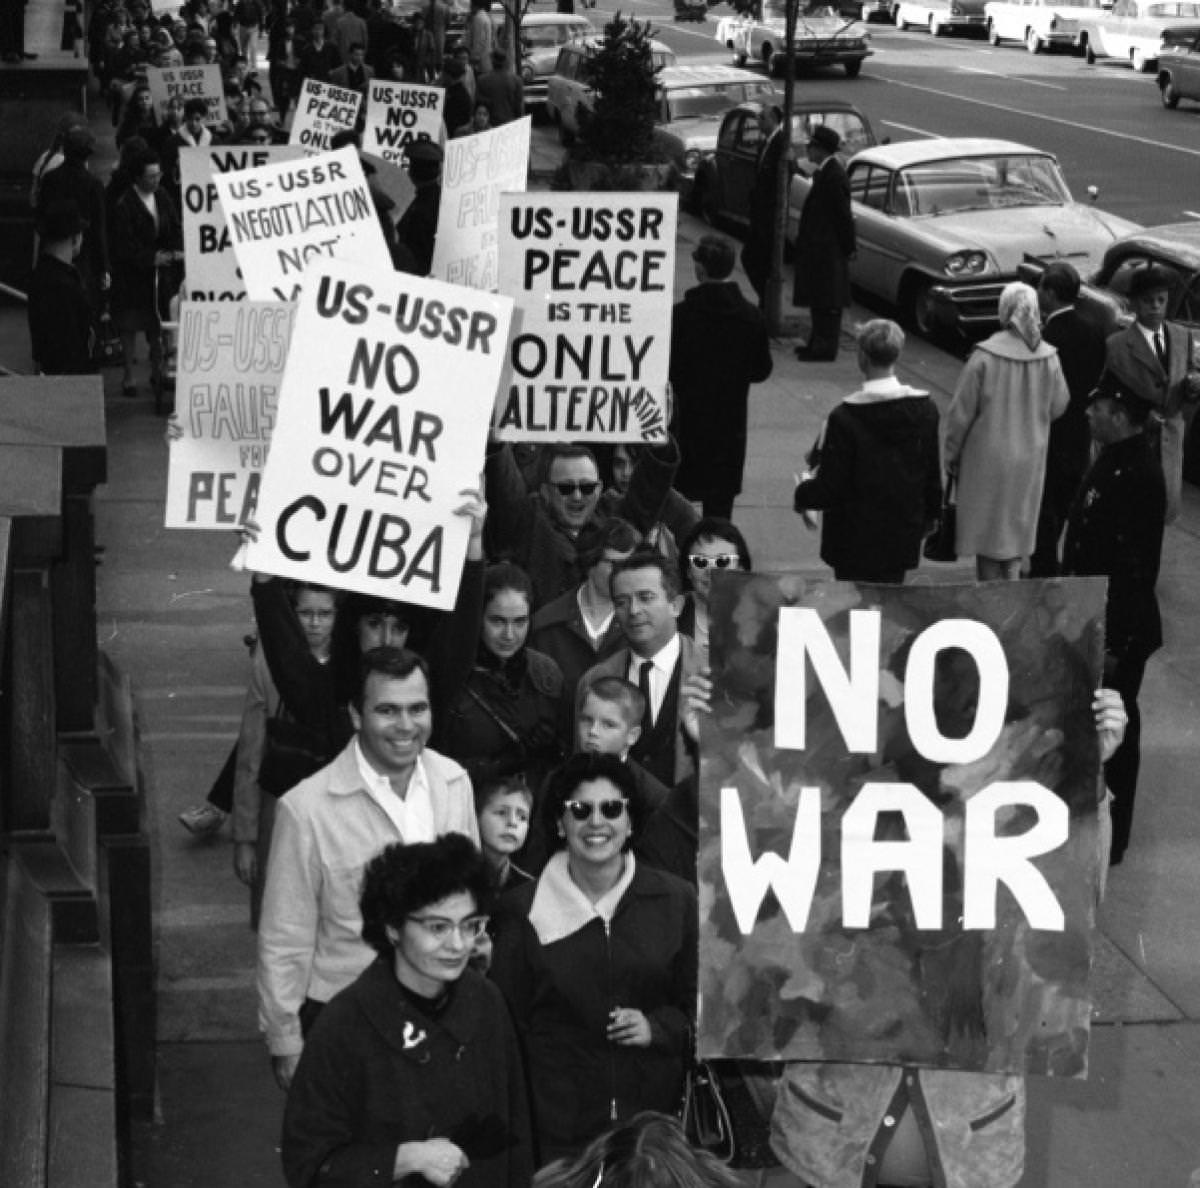 People take to the streets in Washinton D.C., US to protest against any aggression that could lead to war during the Cuban Missile Crisis in 1962. The Soviets wanted to put nuclear missiles in Cuba for first strike capabilities against the US in the event of war. Cuba, having gone communist with Castro rising to power, would be blockaded, and a 13 day standoff took place. Interesting note, the US saw the missiles well before they could be fired, and chose not to destroy them. This was a decision John F Kennedy made, against the wishes of virtually every military advisor he had. This allowed the missiles to become operational and also the possibility of half the East Coast to be destroyed. War was averted at the last minute through back door channels that had both countries disarm and remove missiles in key locations (Cuba for the USSR and Turkey for the US).